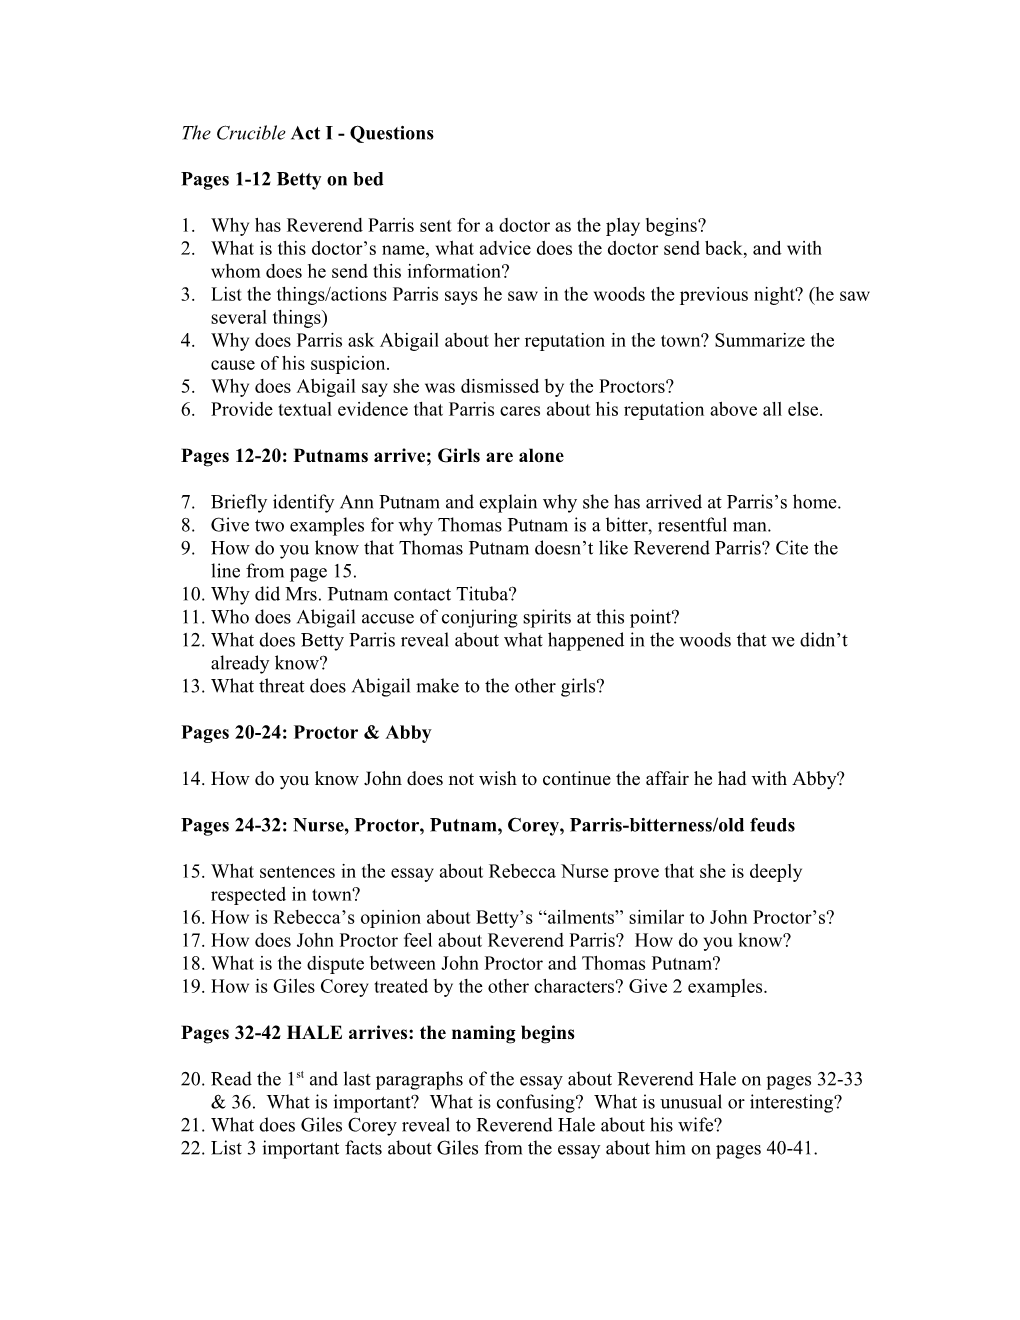 The Crucible Act I Questions (From P3-P24)